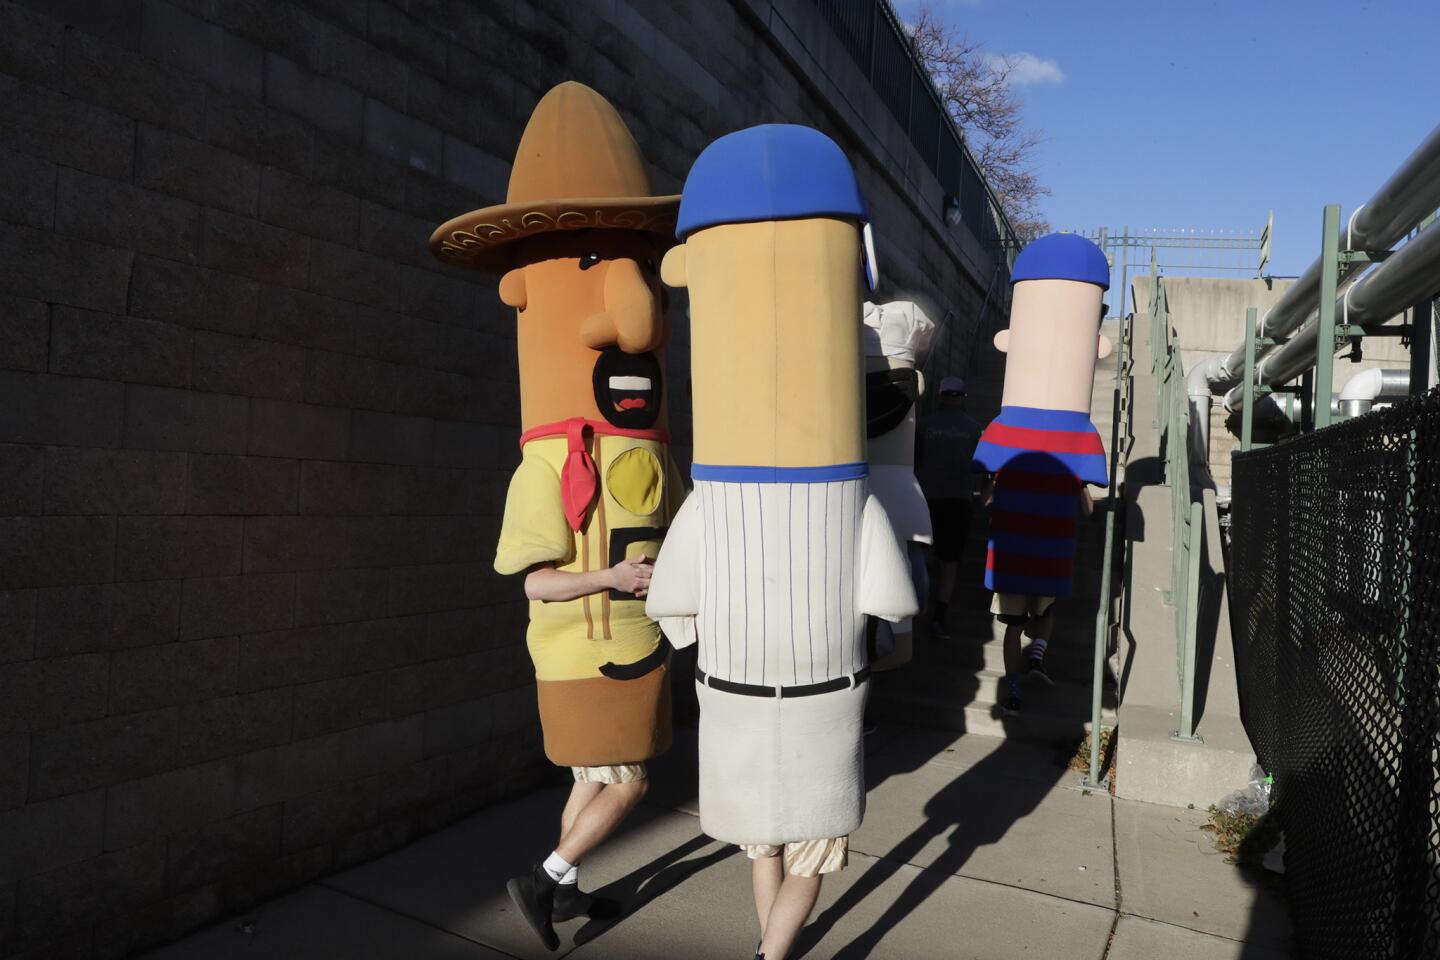 Chorizo Sausage glances at a follower as the rest of the famous racing sausages head to the main level of Miller Park before Game 7.